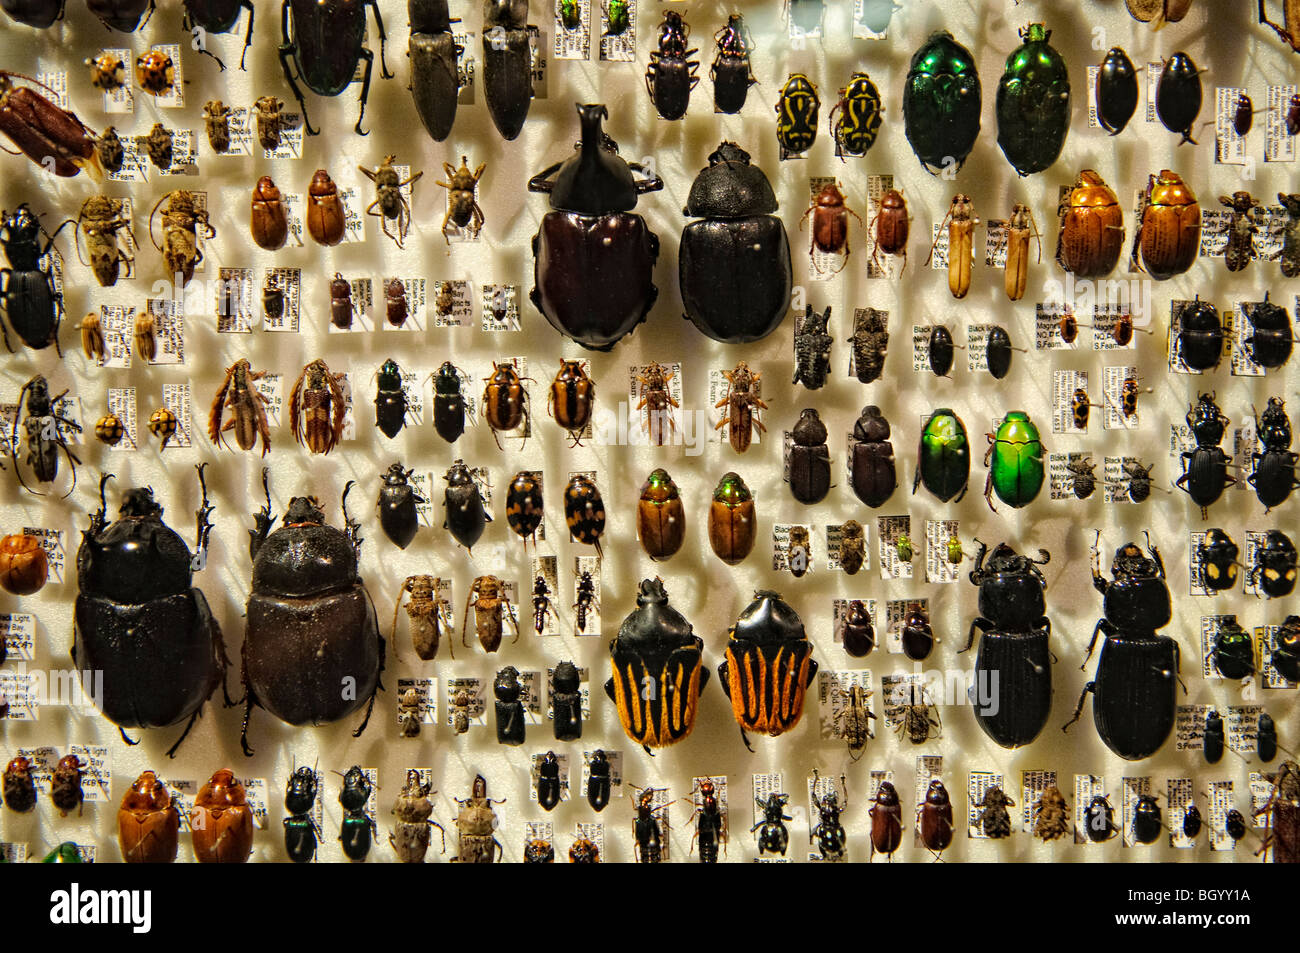 BRISBANE, Australia - Display of Queensland insects on display in the Queensland Museum Stock Photo